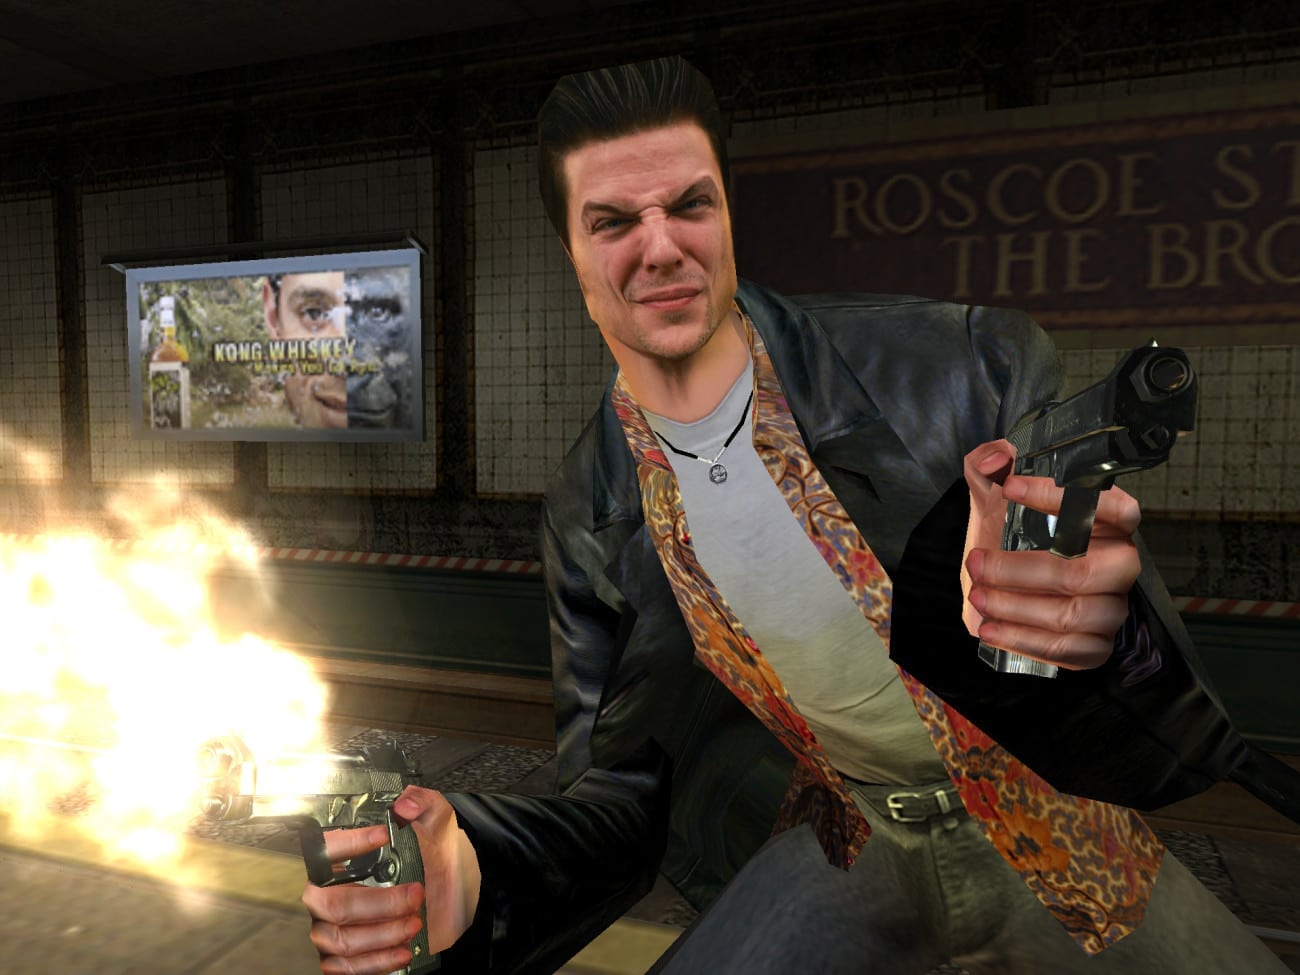 Max Payne 1 and 2 remake update from Remedy signals project progress